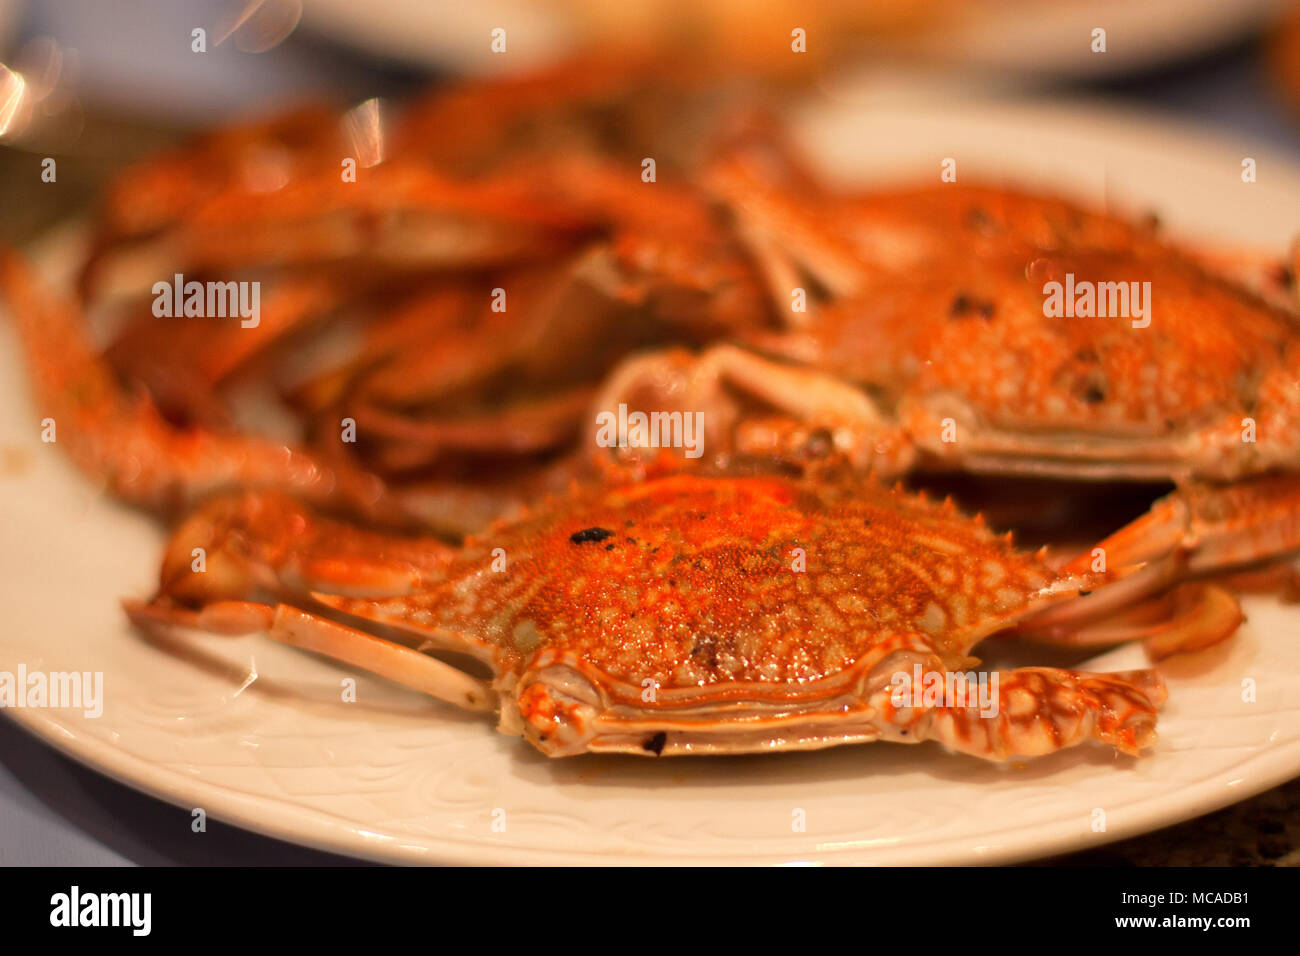 Cooked crabs on plate close Stock Photo